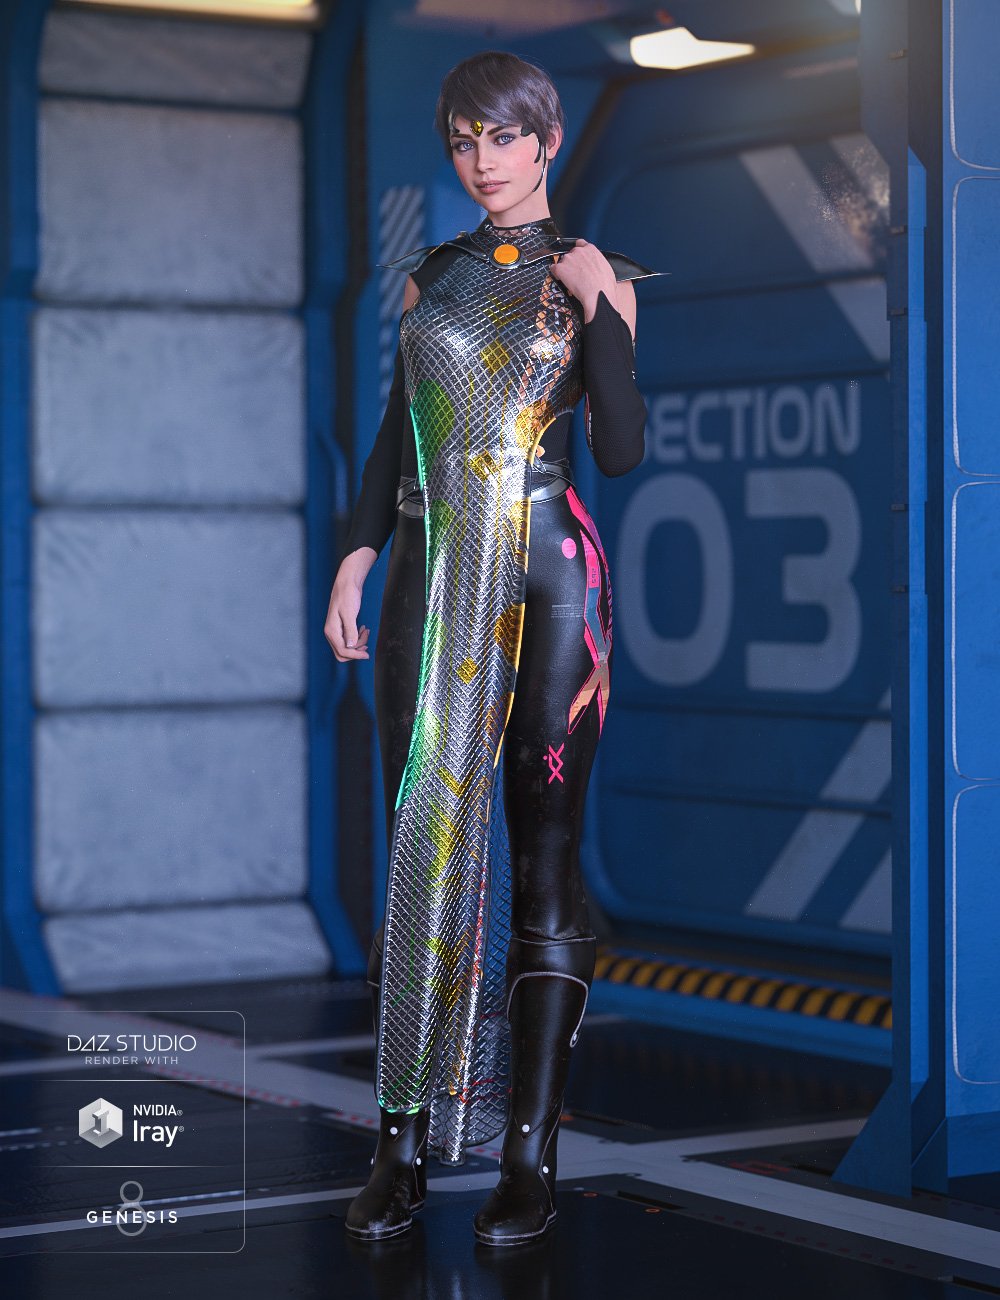 G.I.S Admiral: Lore by: Moonscape GraphicsSade, 3D Models by Daz 3D